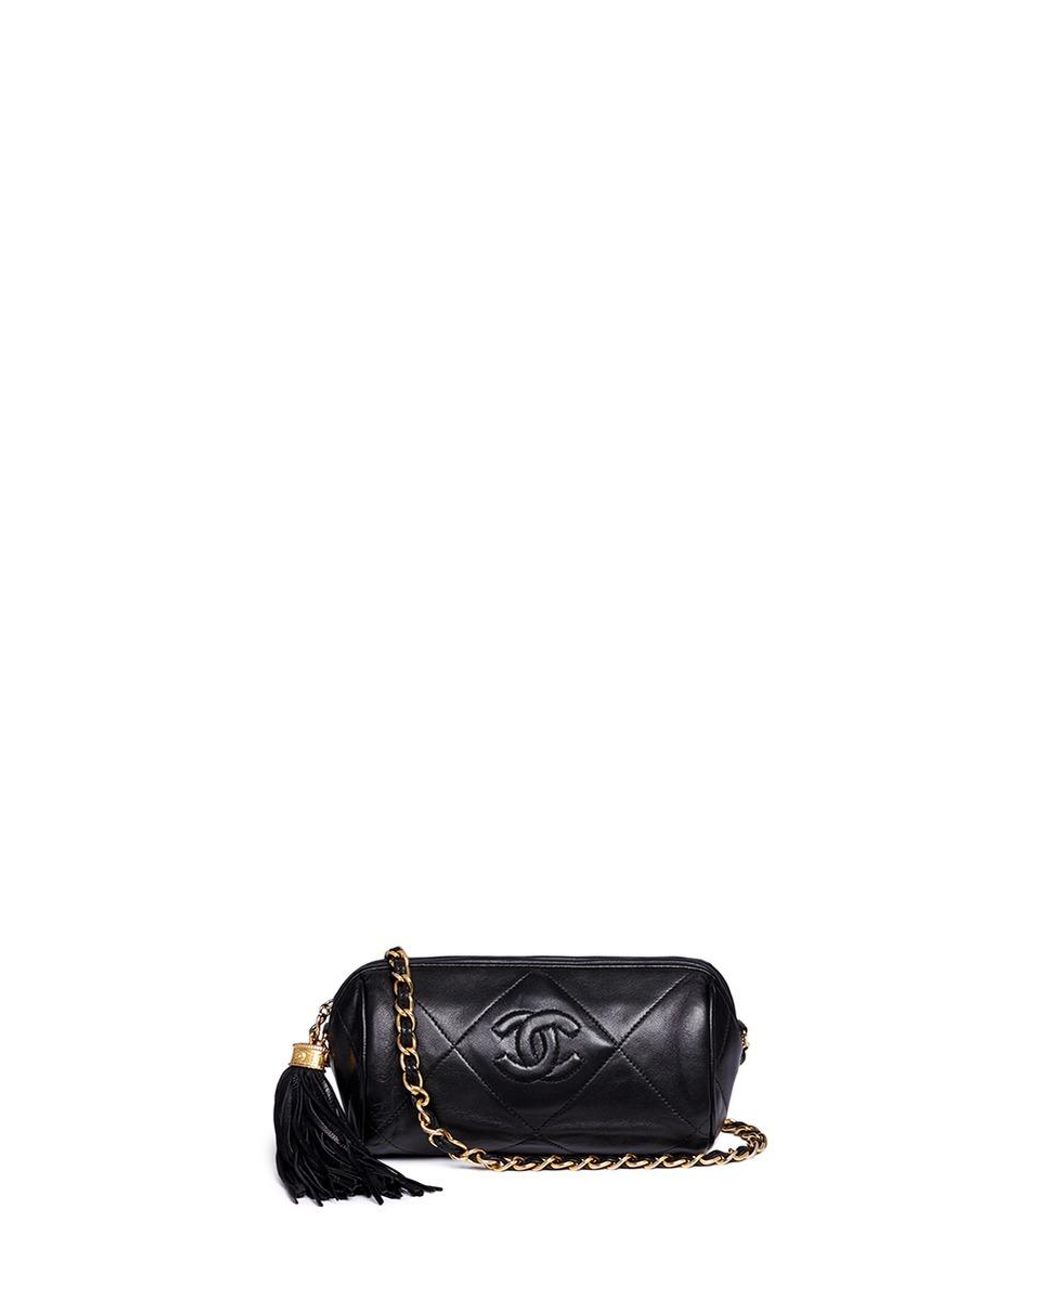 Chanel Mini Quilted Leather Barrel Bag in Black